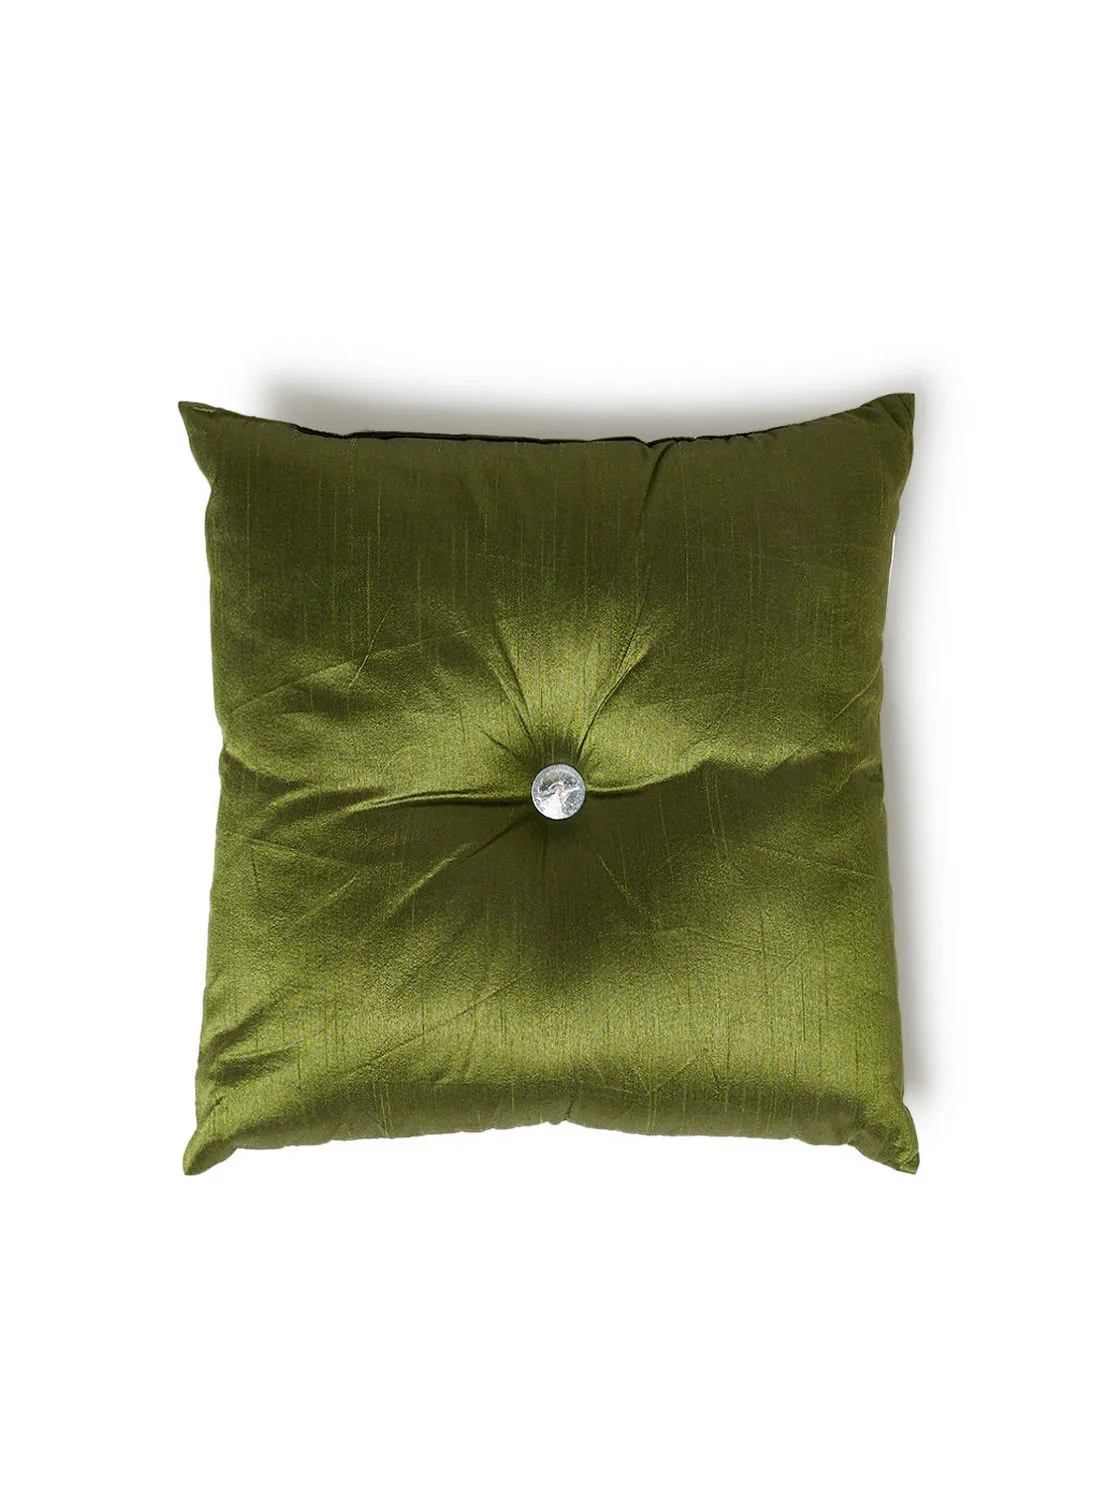 Hometown Decorative Cushion , Size 30X30 Cm Shimmery Dark Green - 100% Polyester Bedroom Or Living Room Decoration